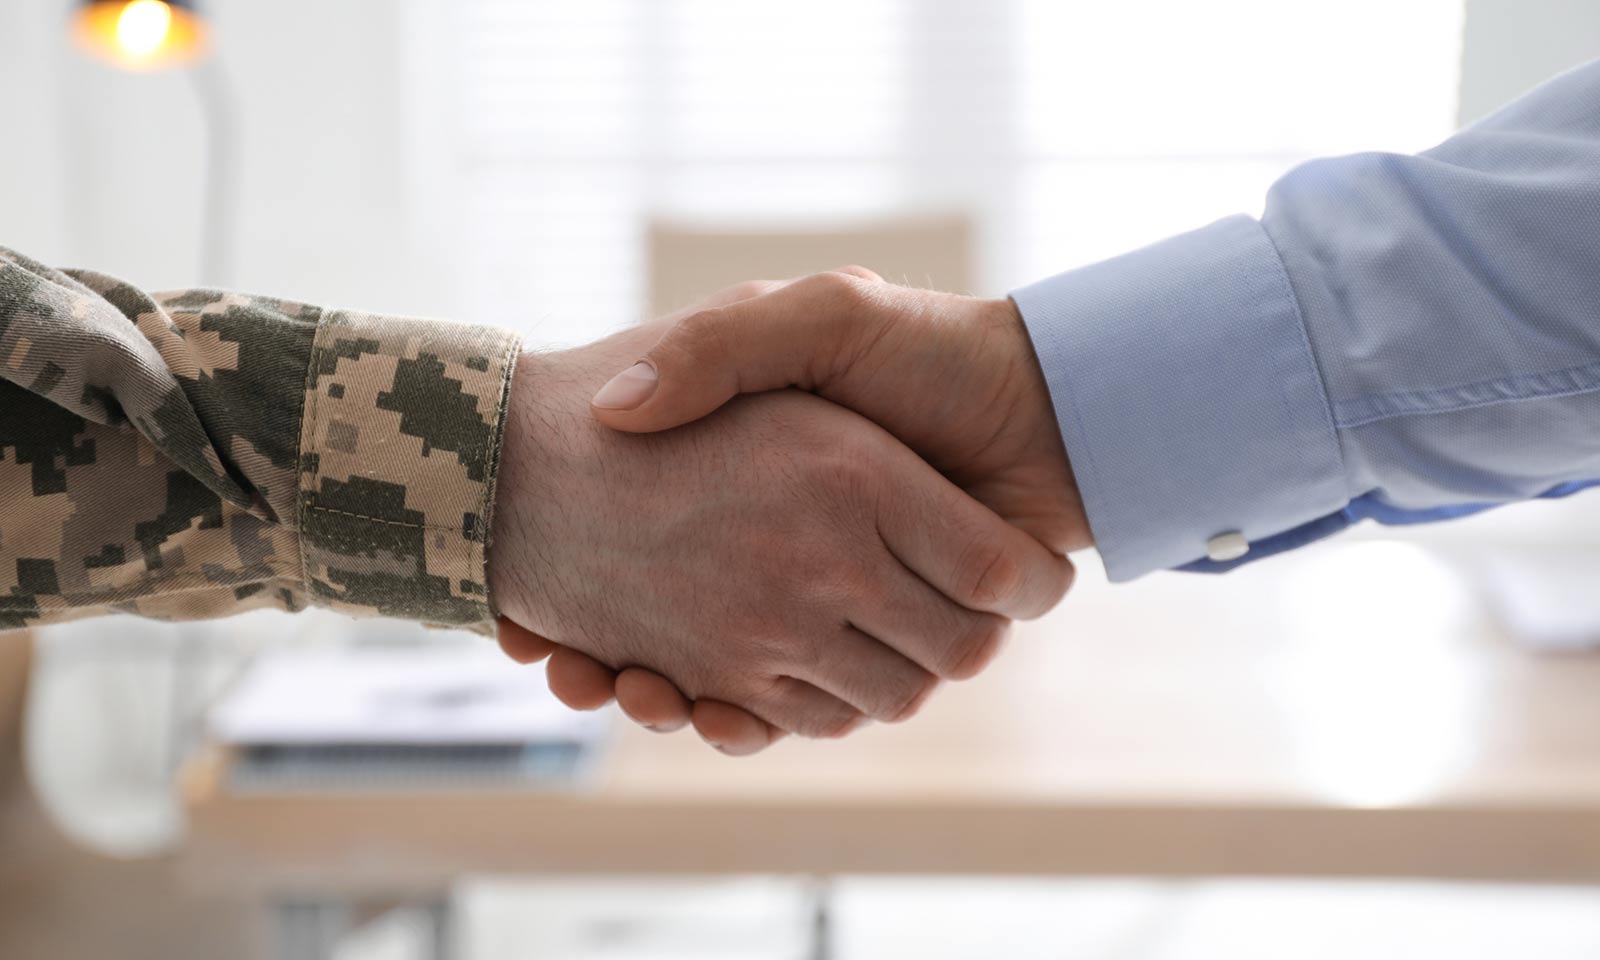 Soldier and businessman shaking hands indoors, closeup